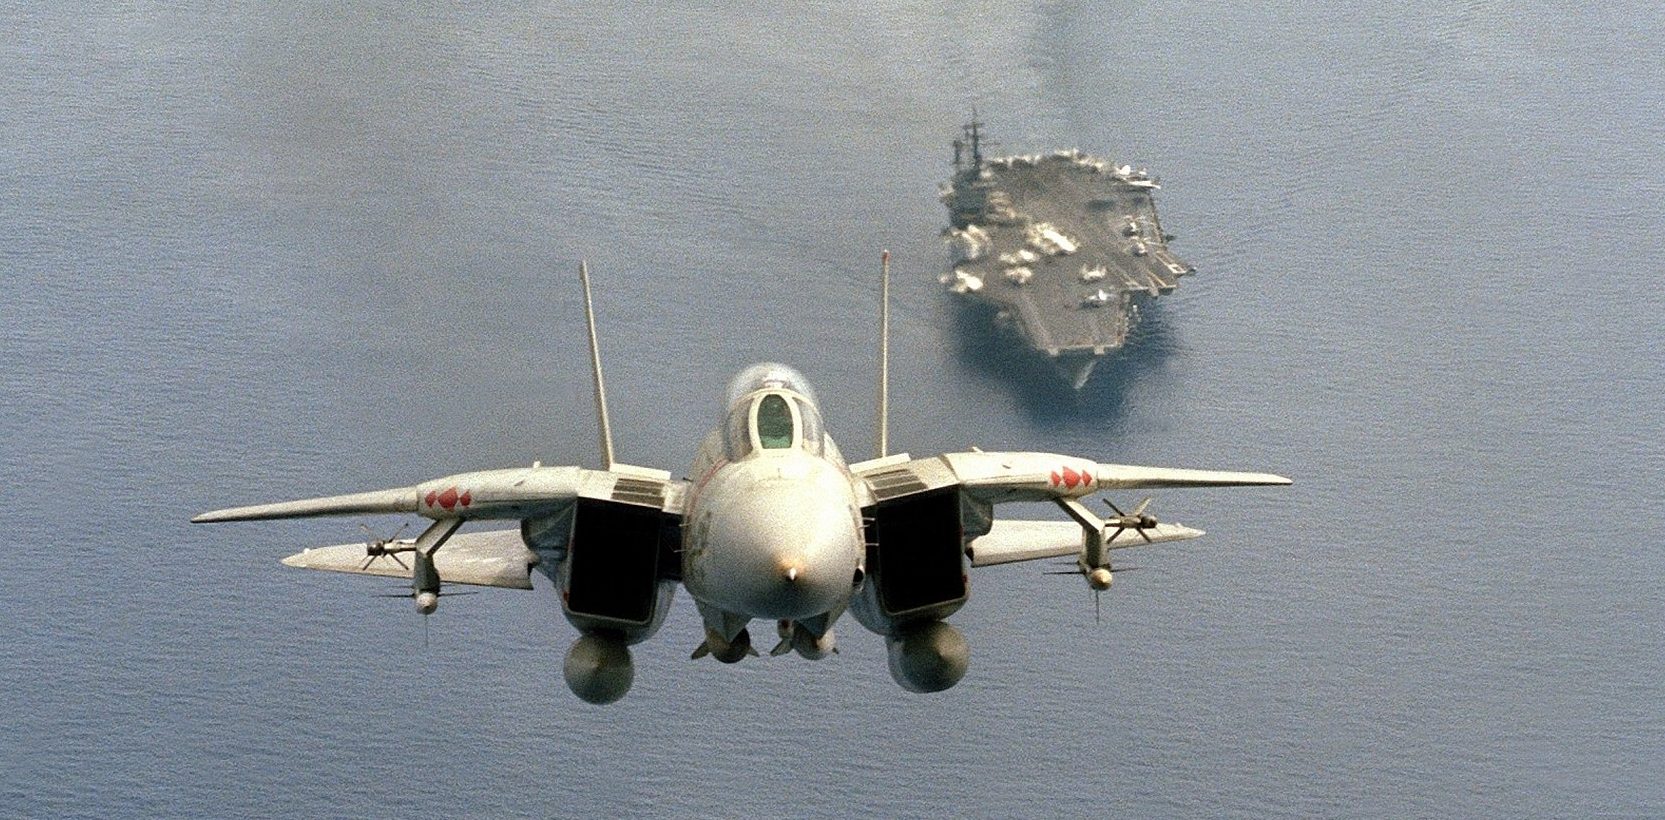 Wifi Booster Xxx - Why did the F-14 Tomcat retire decades before its peers? - Sandboxx